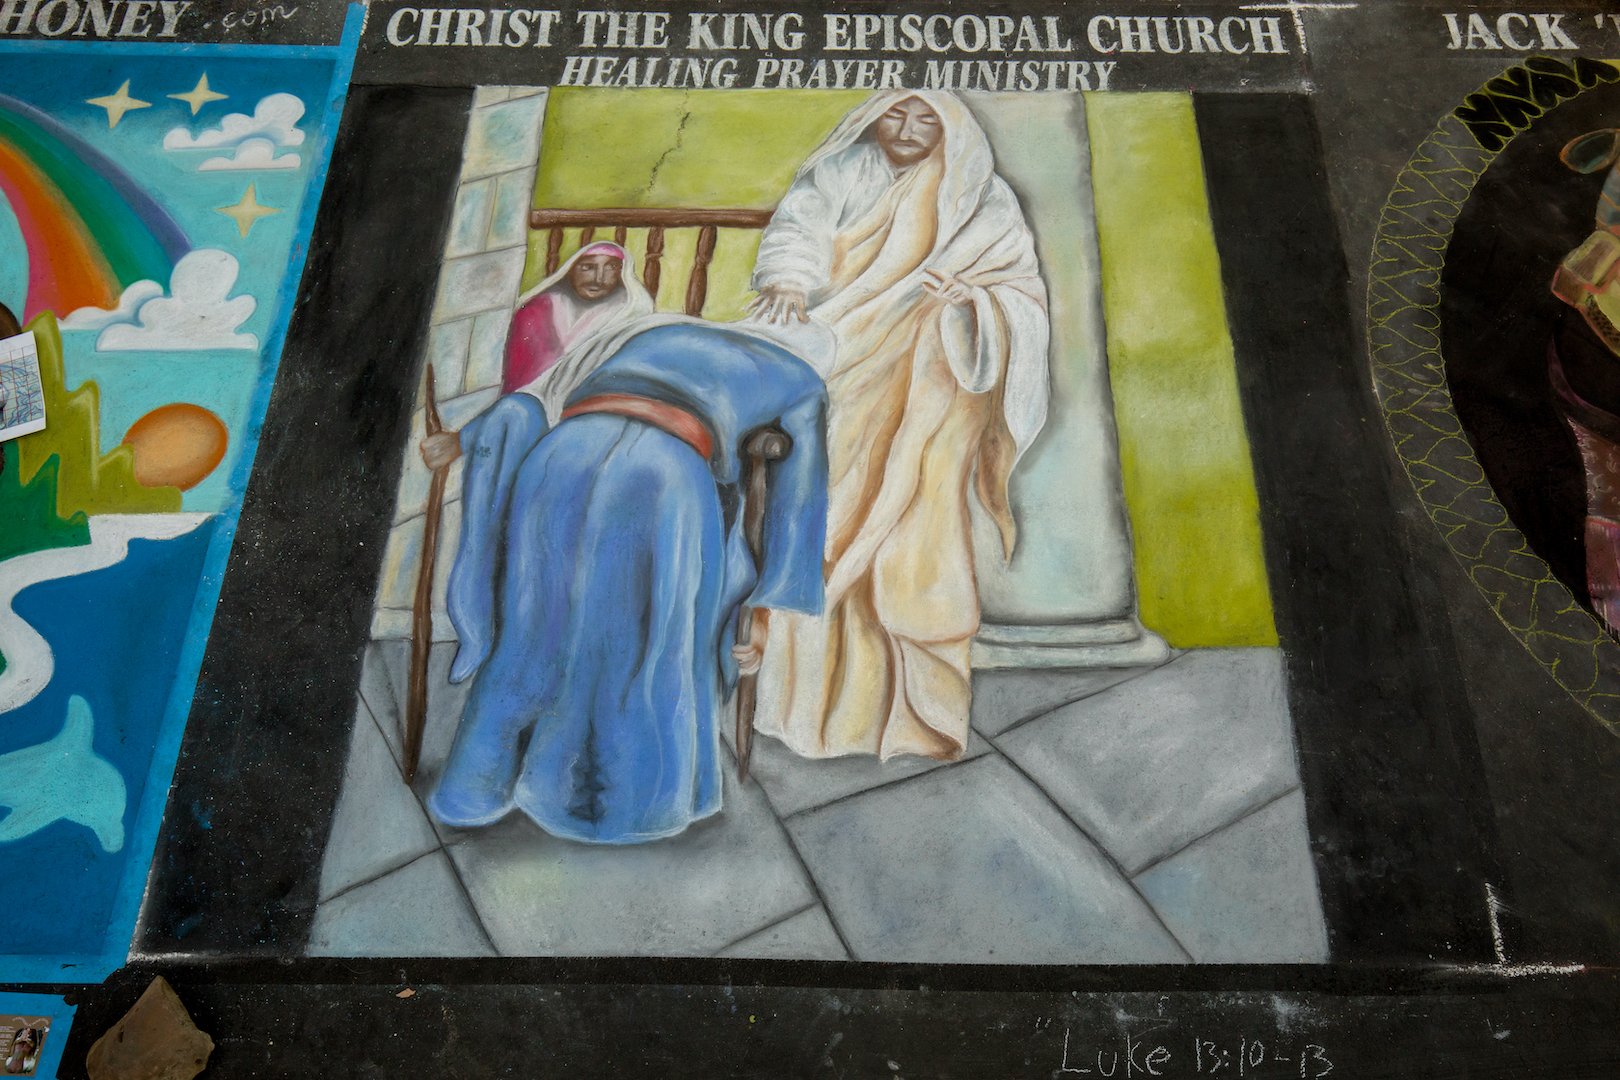  Christ the King Episcopal Church Healing Prayer Ministry  Artists:  Ky Biswell and Brendan Briggs 